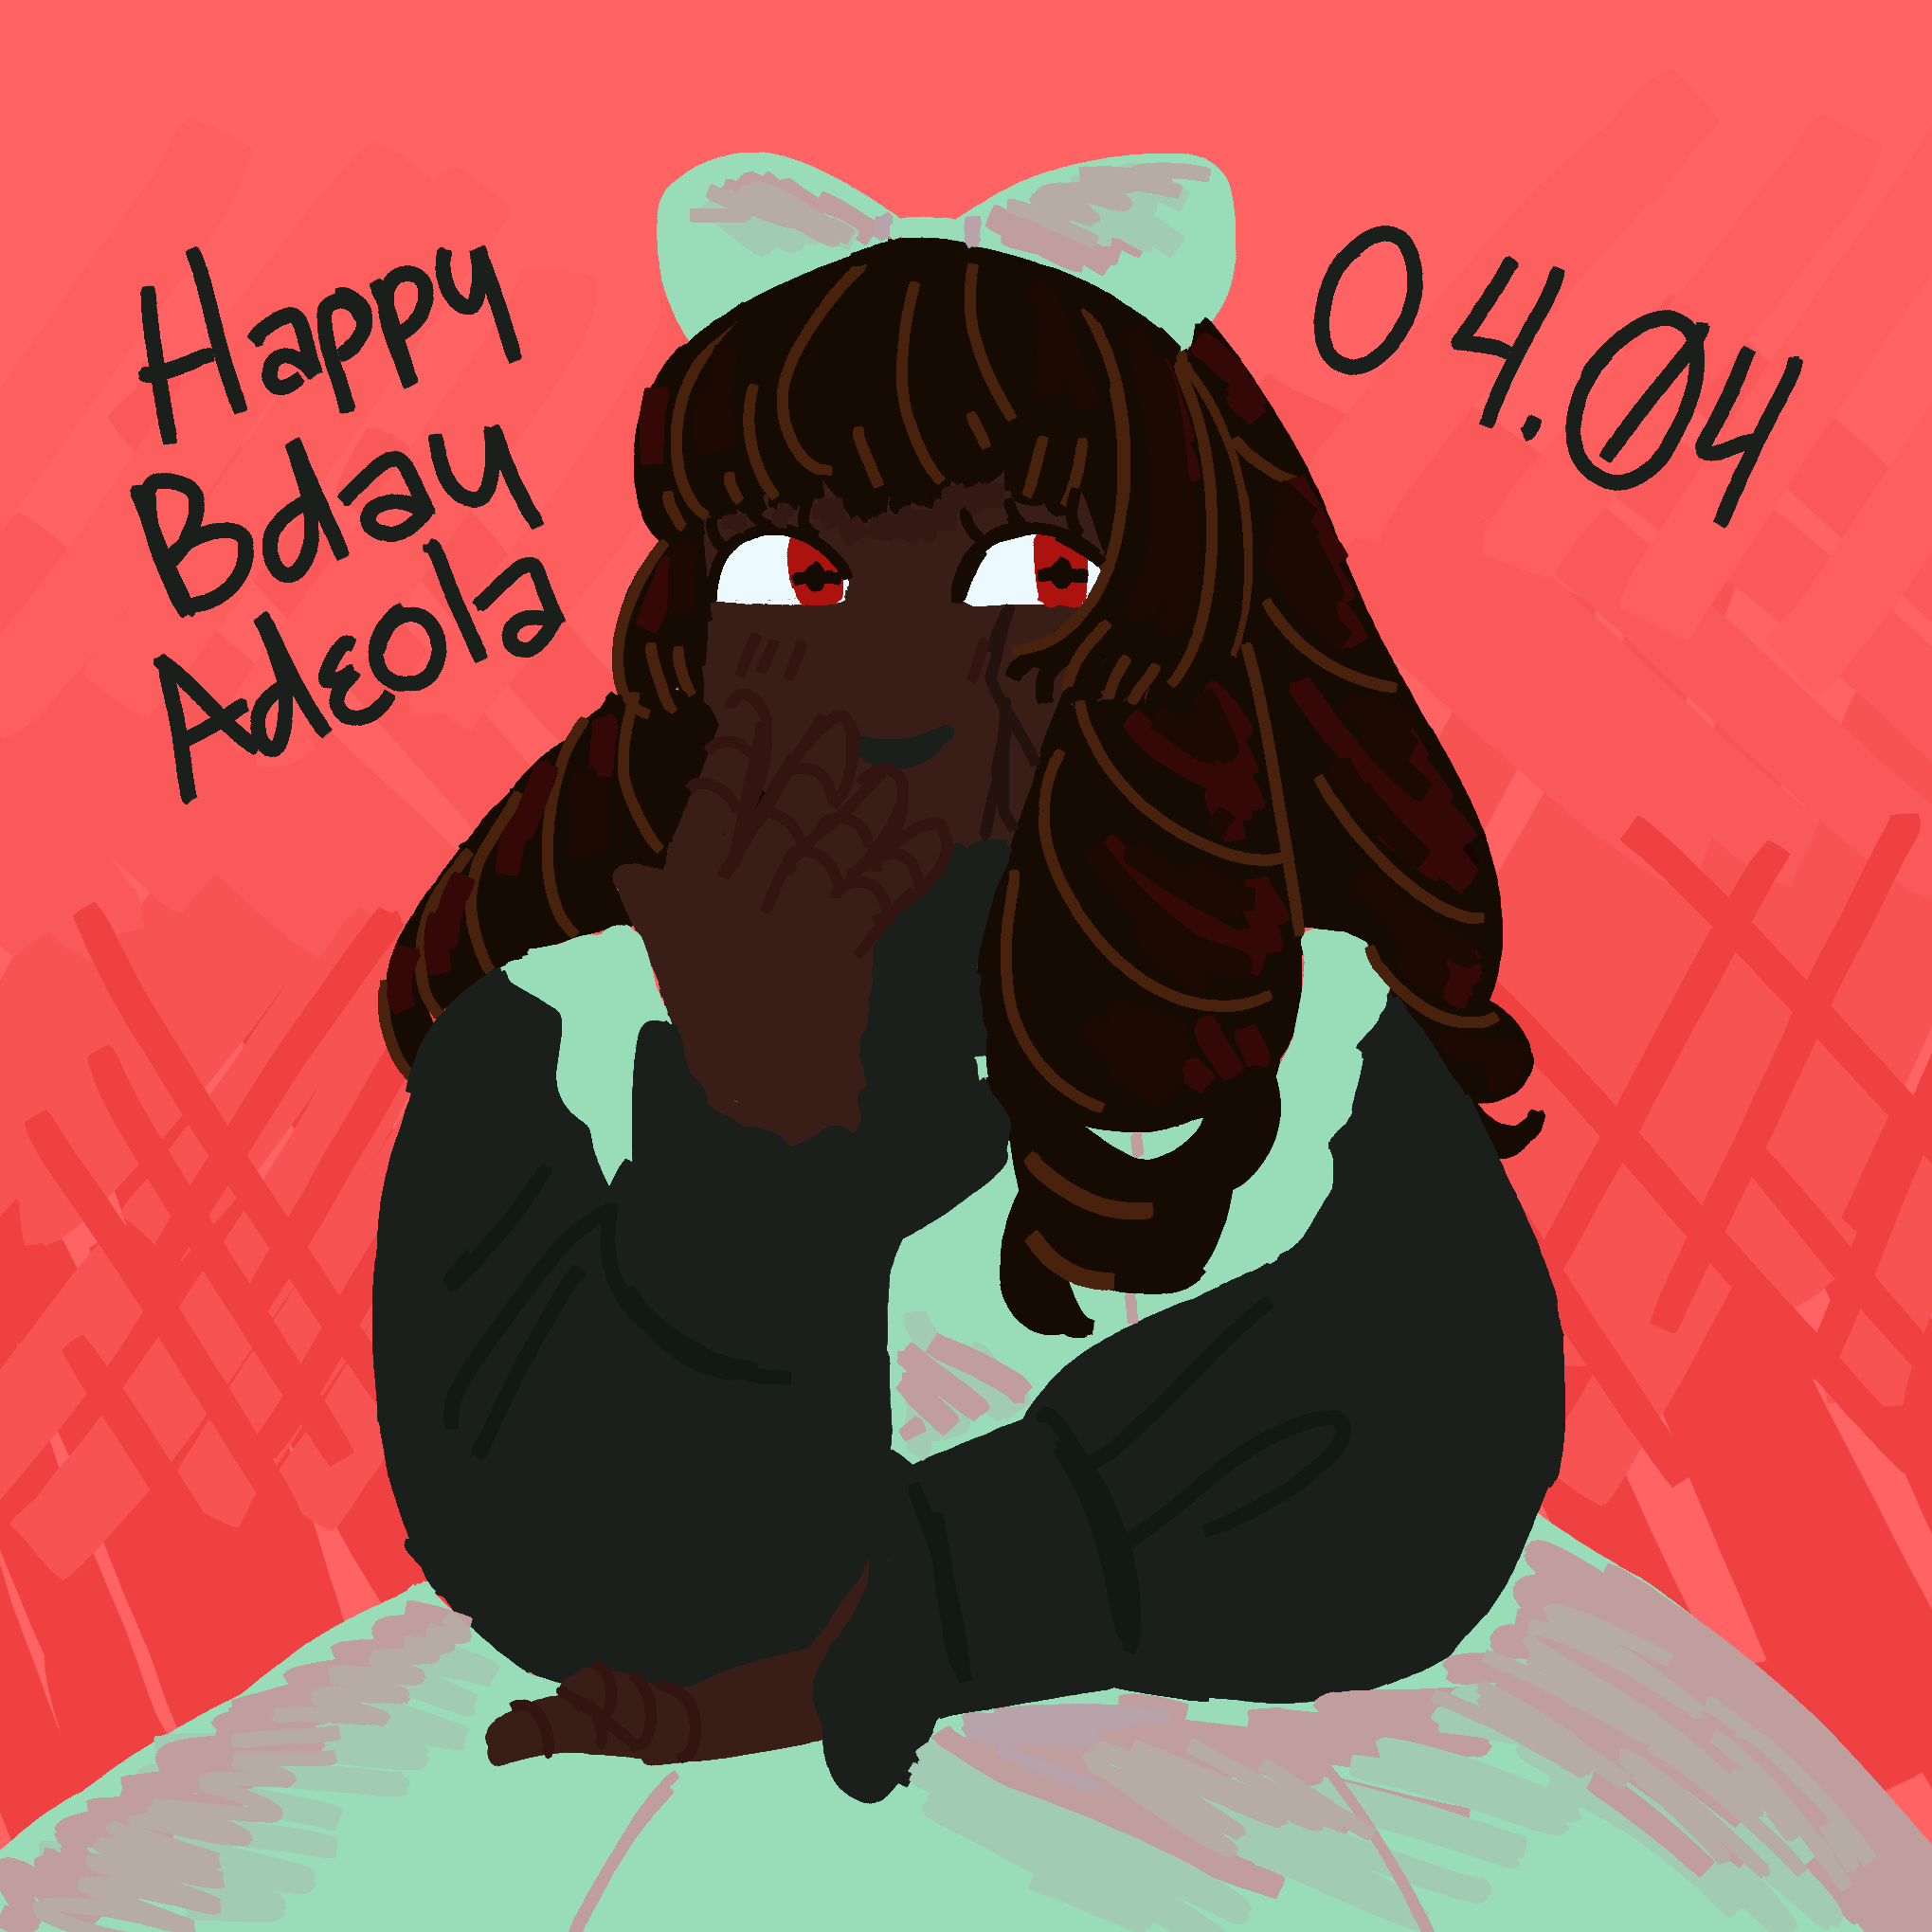 Adeola in a mint green jumper skirt with a black blouse. She is wearing a big mint green bow on her head. Her cheek is resting in her hand as she smiles towards the viewer. The background is pink with hatching in different shades. Text next to Adeola's head reads 'Happy Birthday, Adeola 04.04'